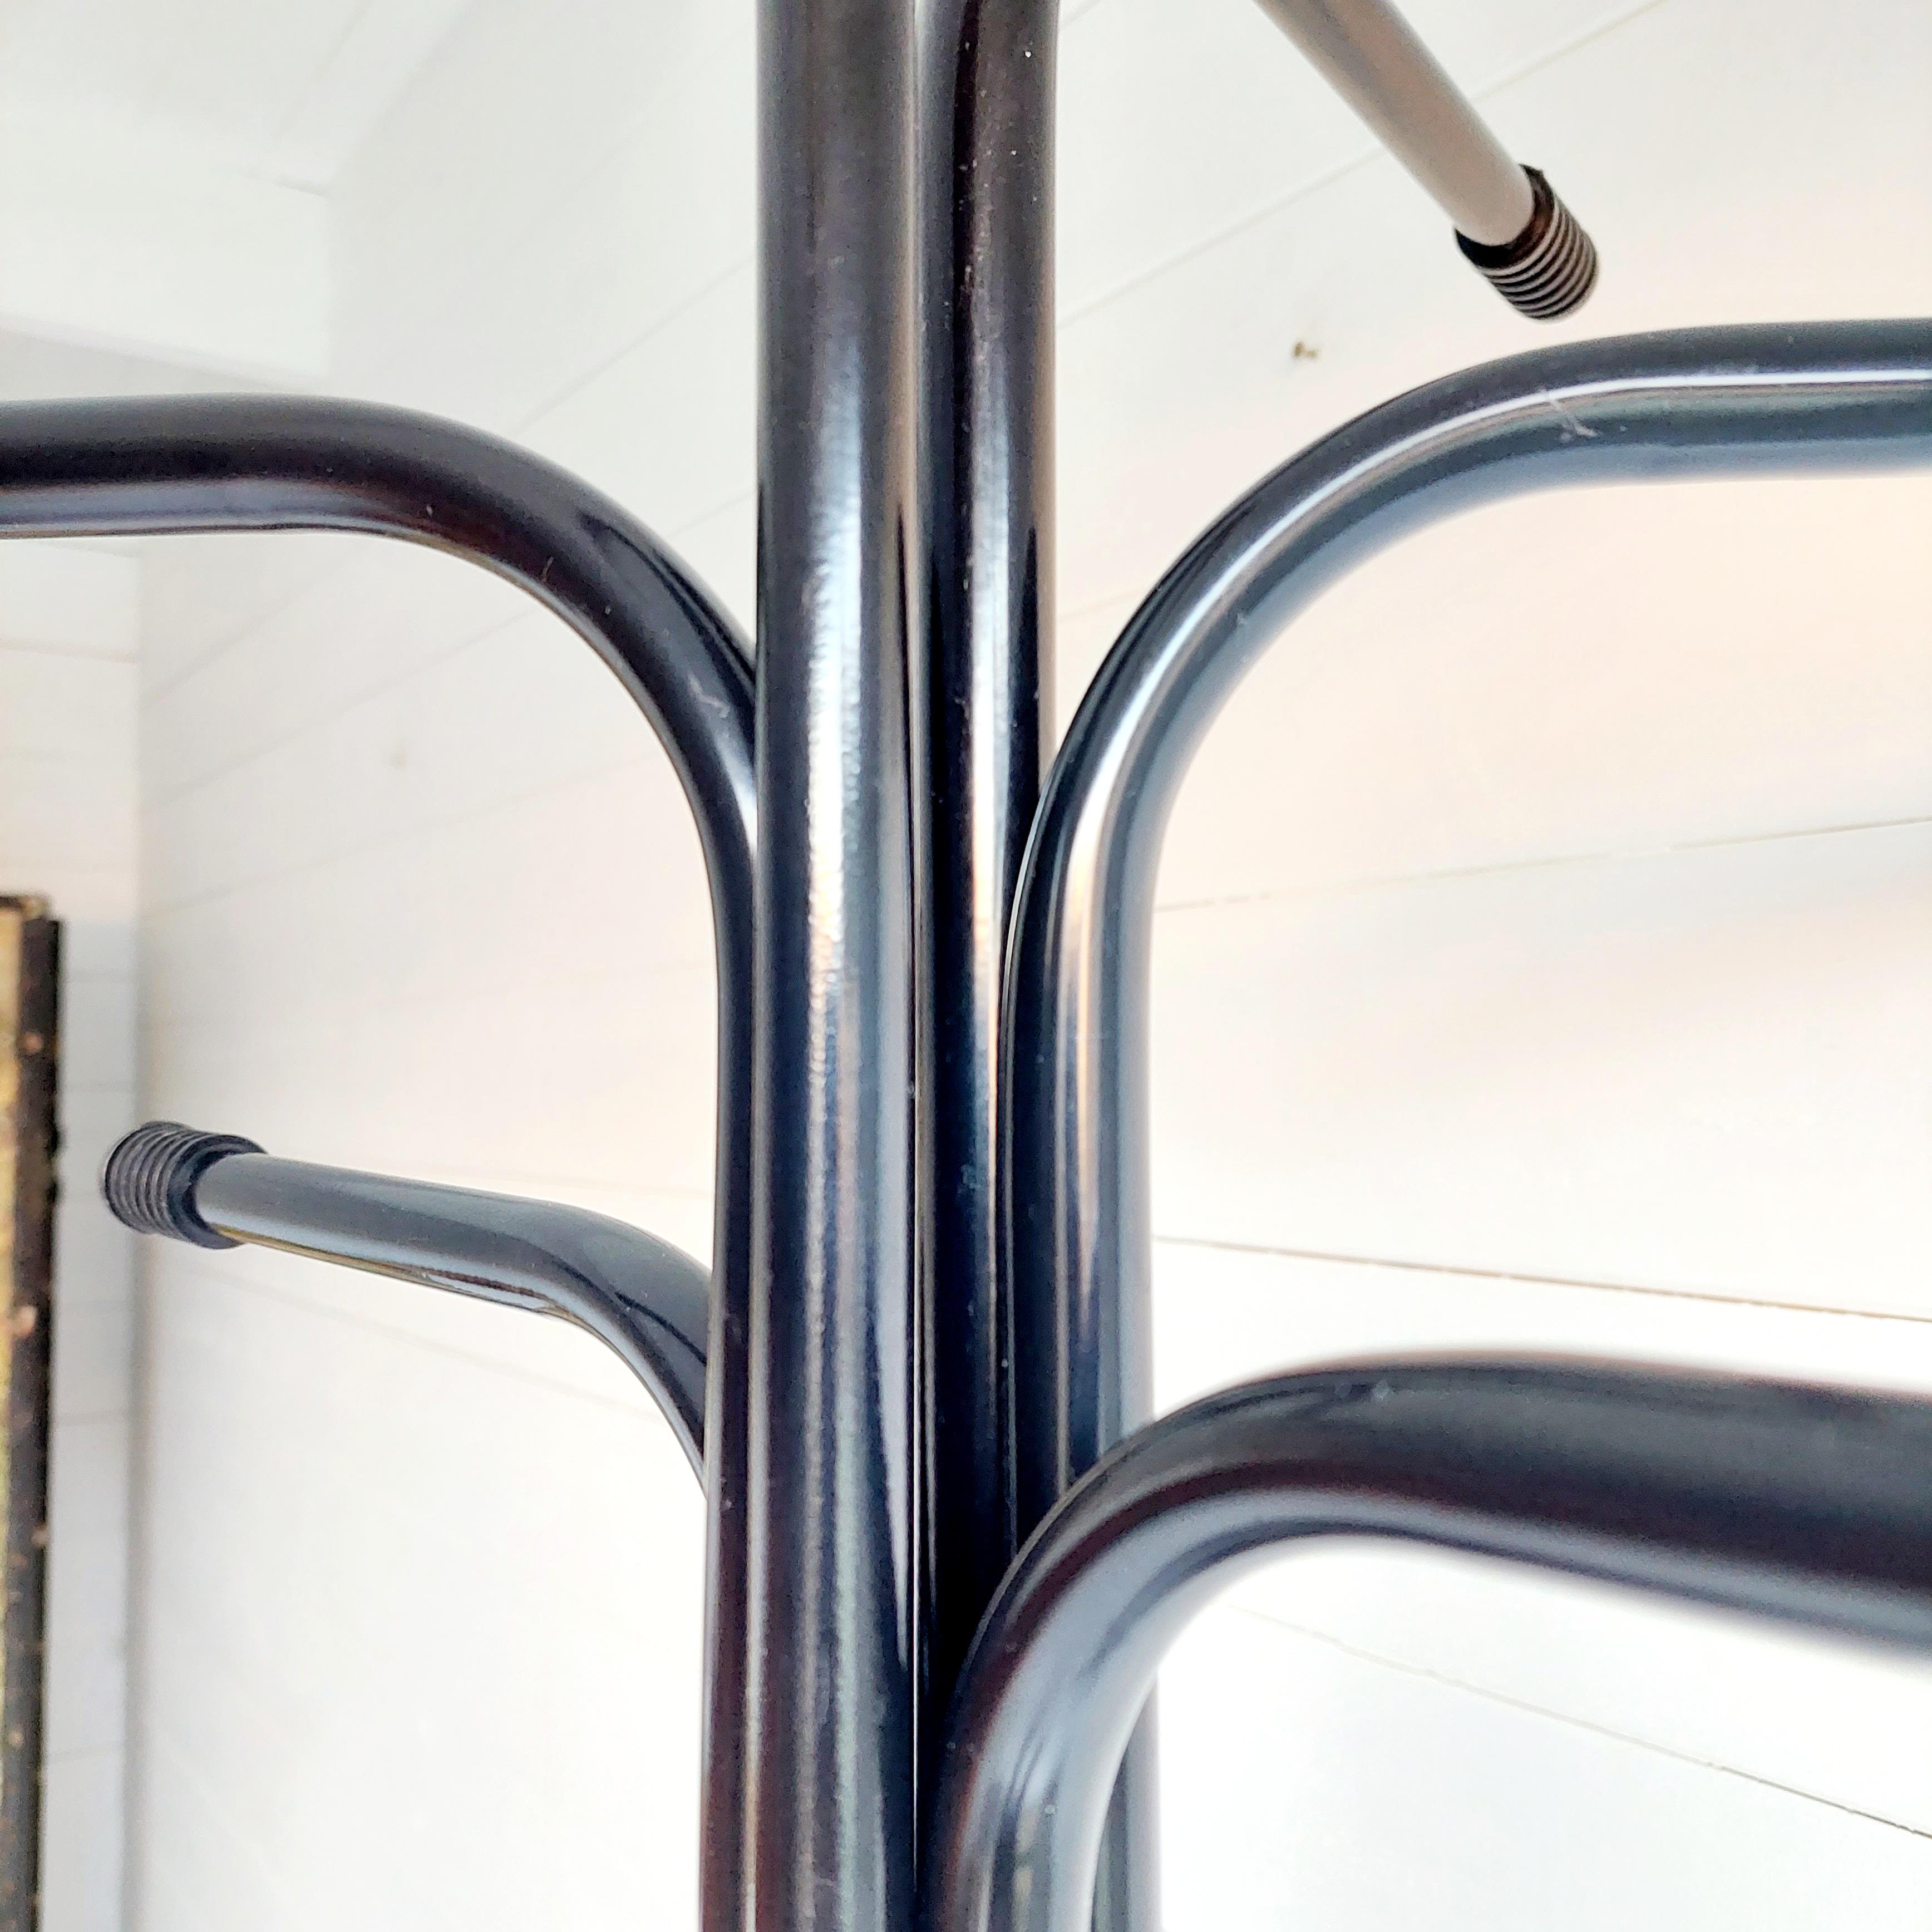 European Vintage Rigg Coat Stand by Tord Bjorklund for Ikea 80s Tubular Metal Black For Sale